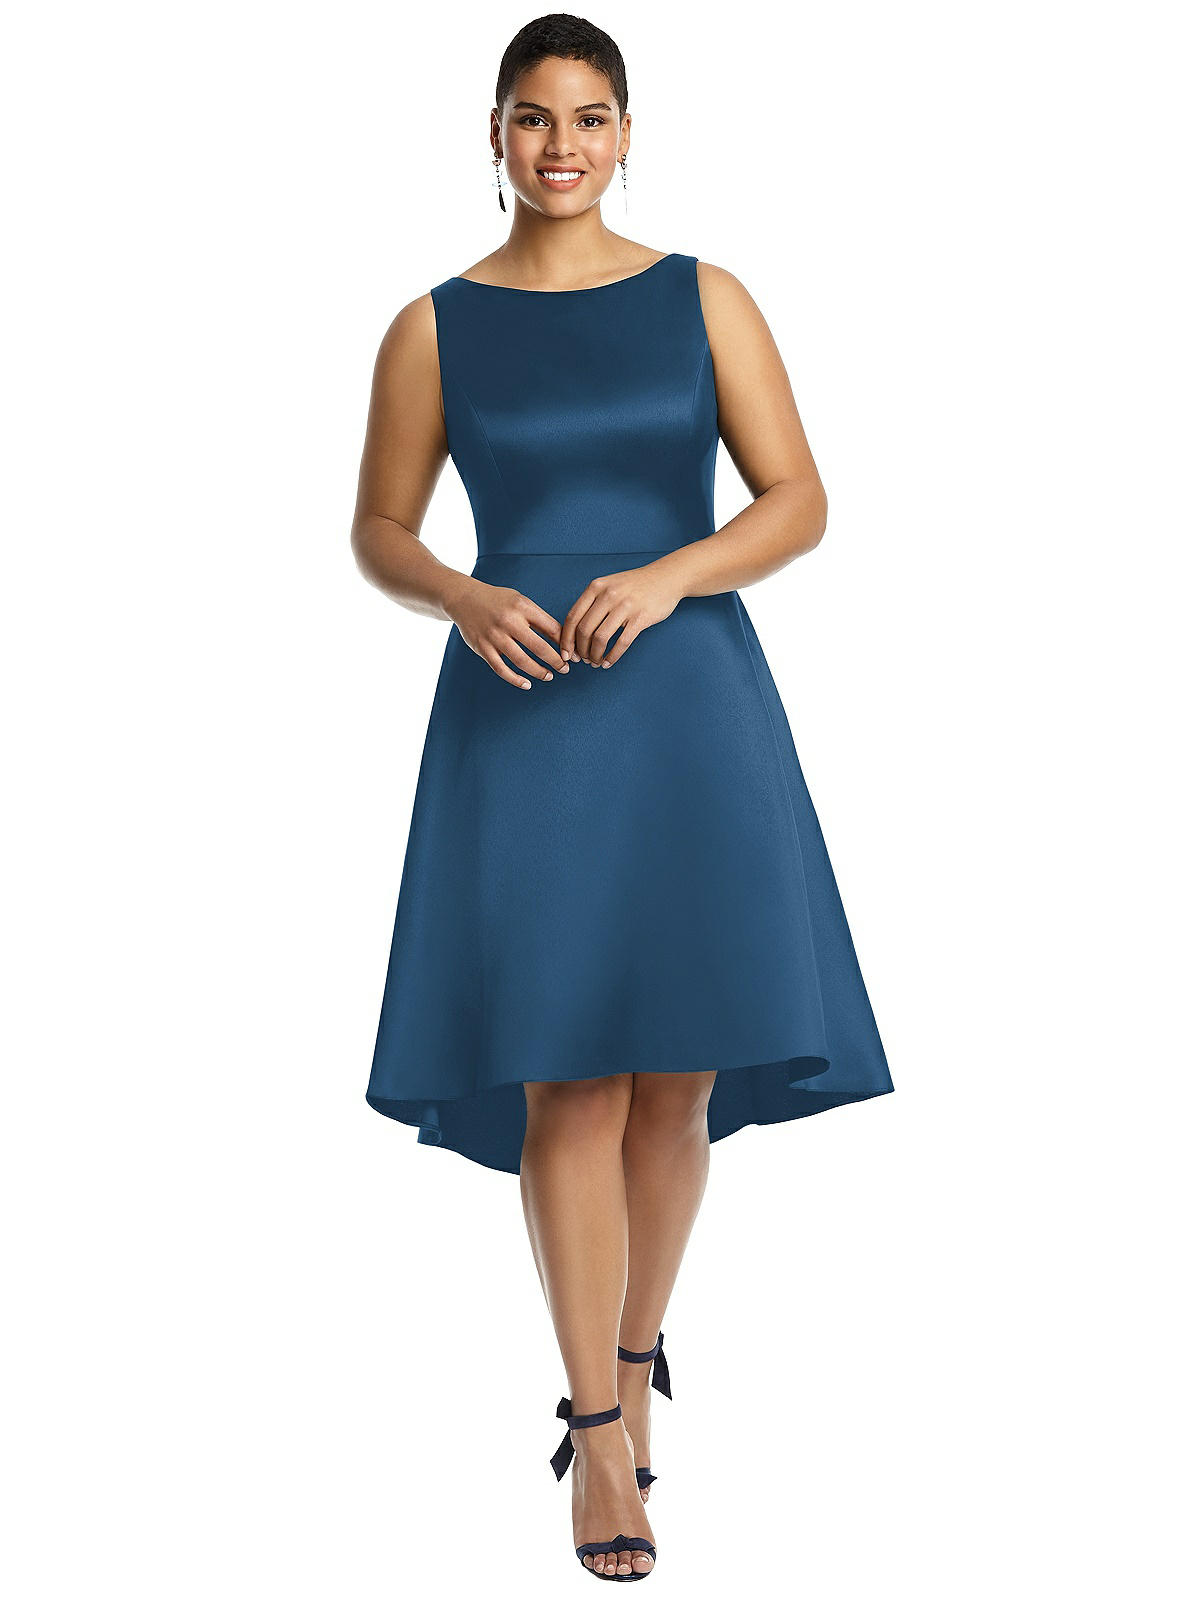 Dusk The High Dessy In Bridesmaid Dress Blue Group Cocktail | Satin Bateau Neck Low